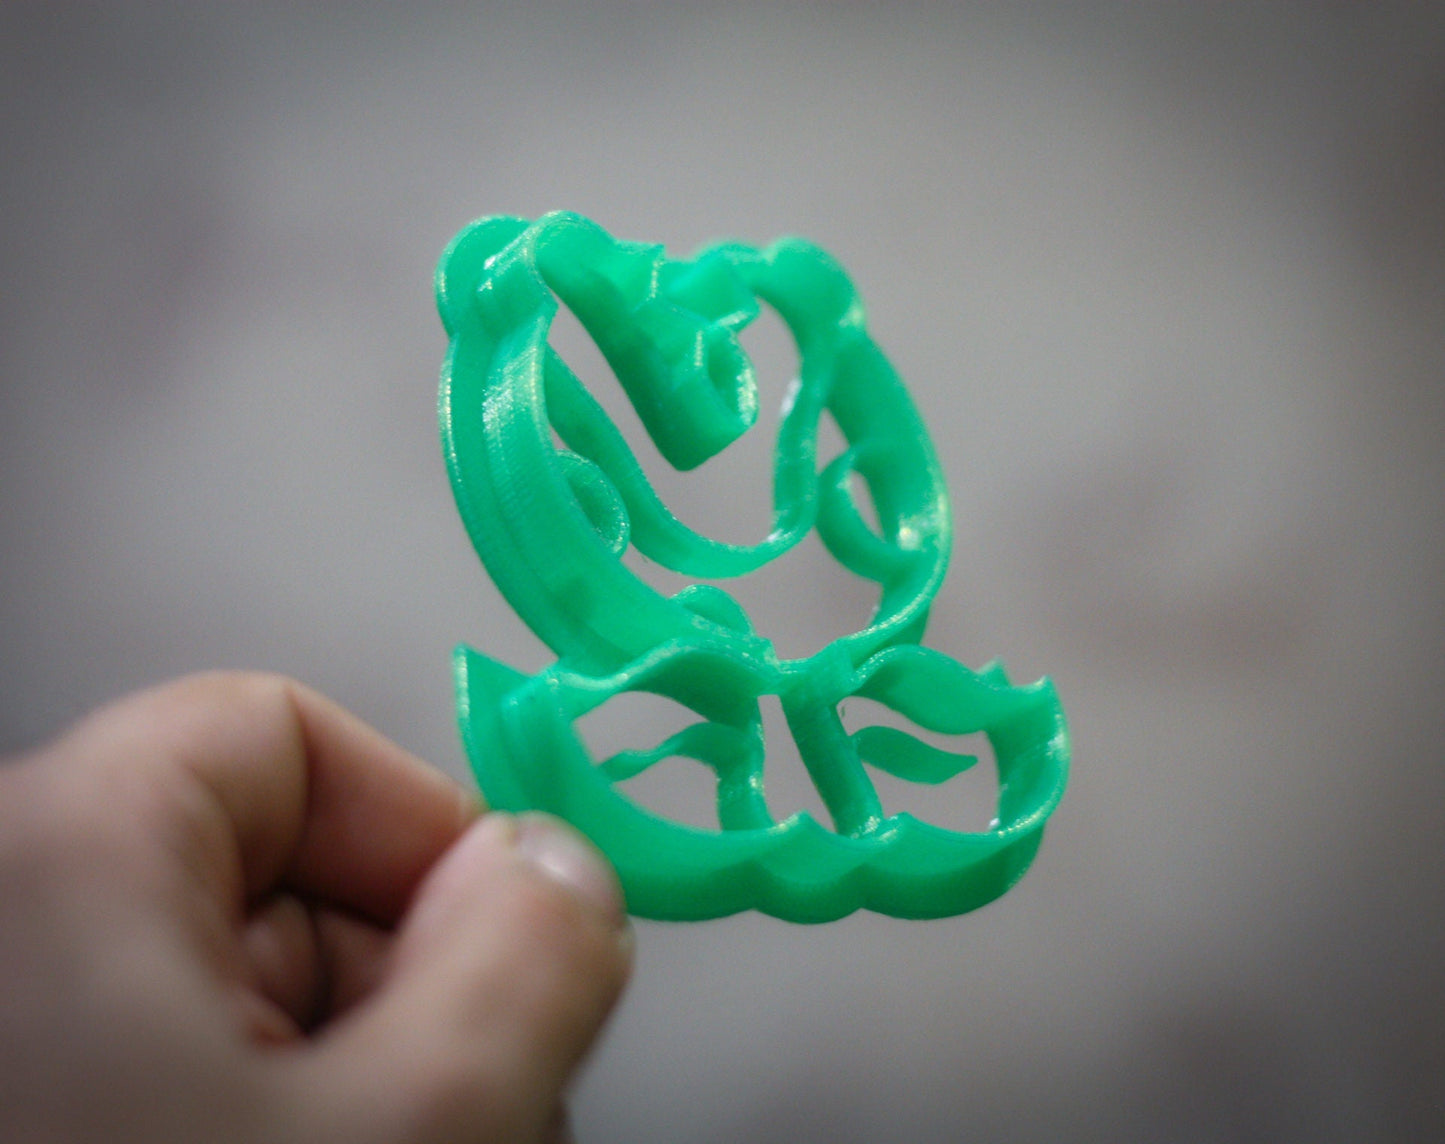 Super Mario Plant Cookie Cutter for Mario bros Birthday Party - 3DPrintProps